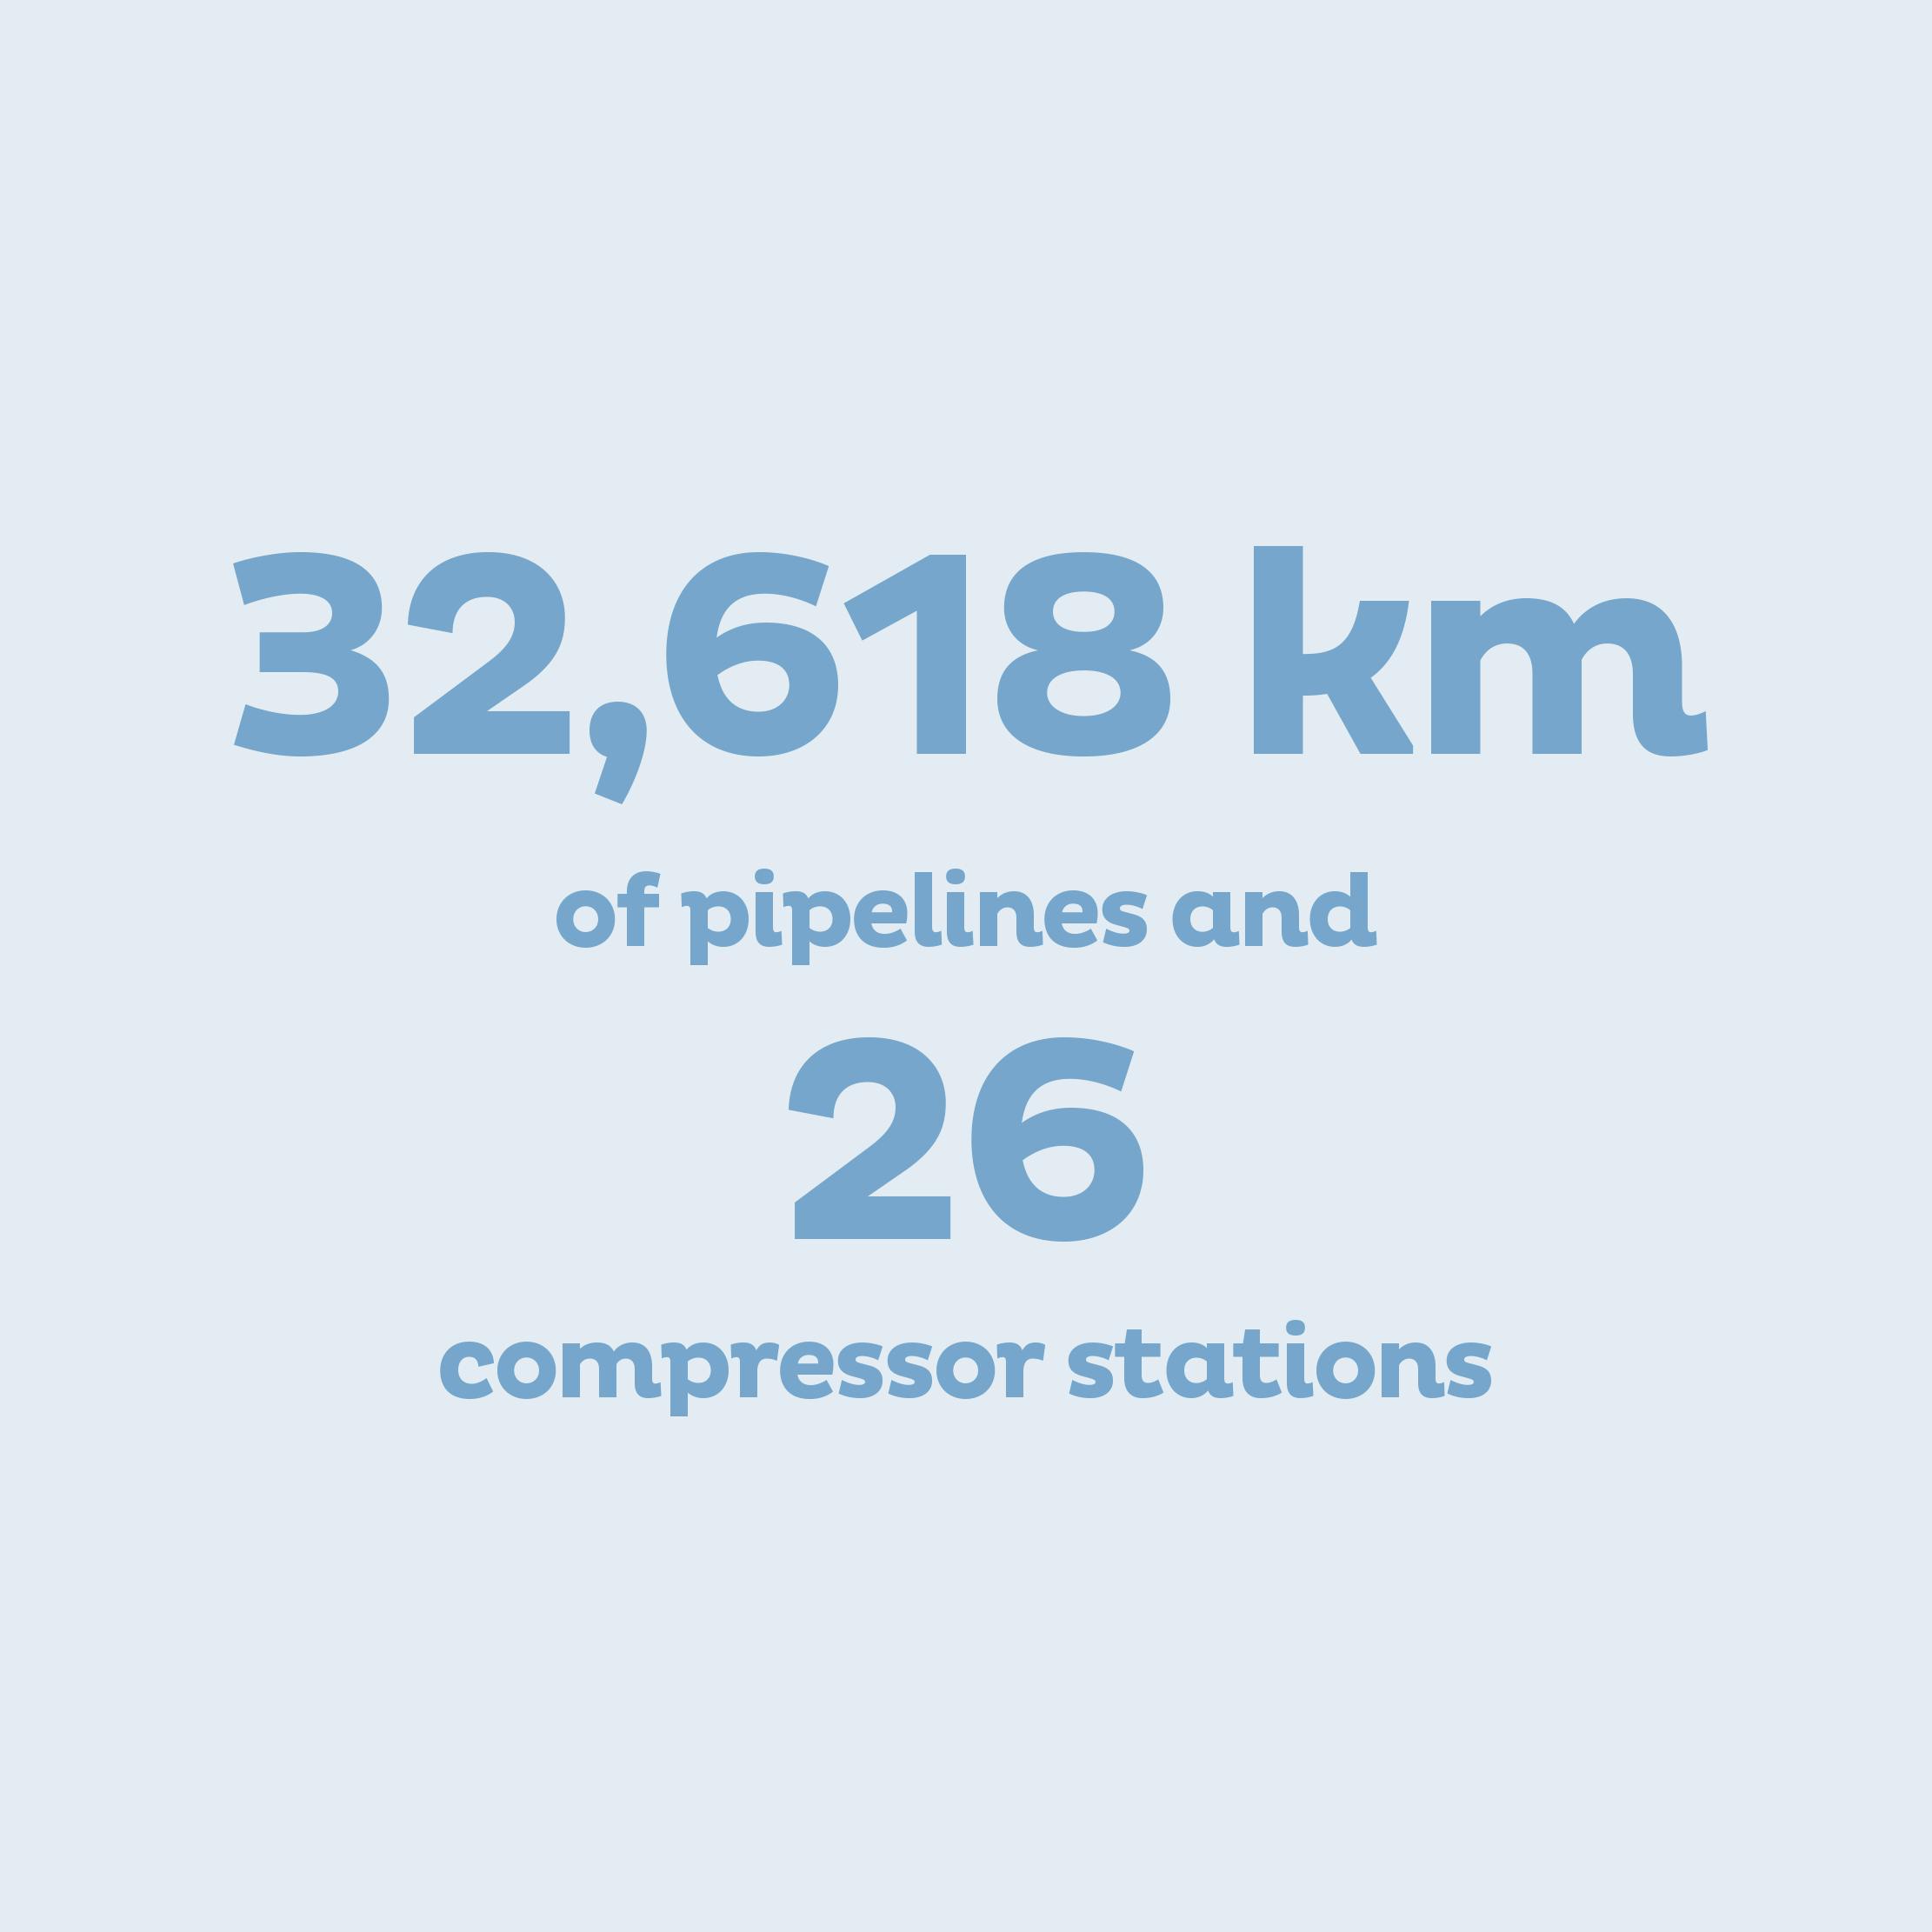 32,618 km of pipelines and 26 compressor stations